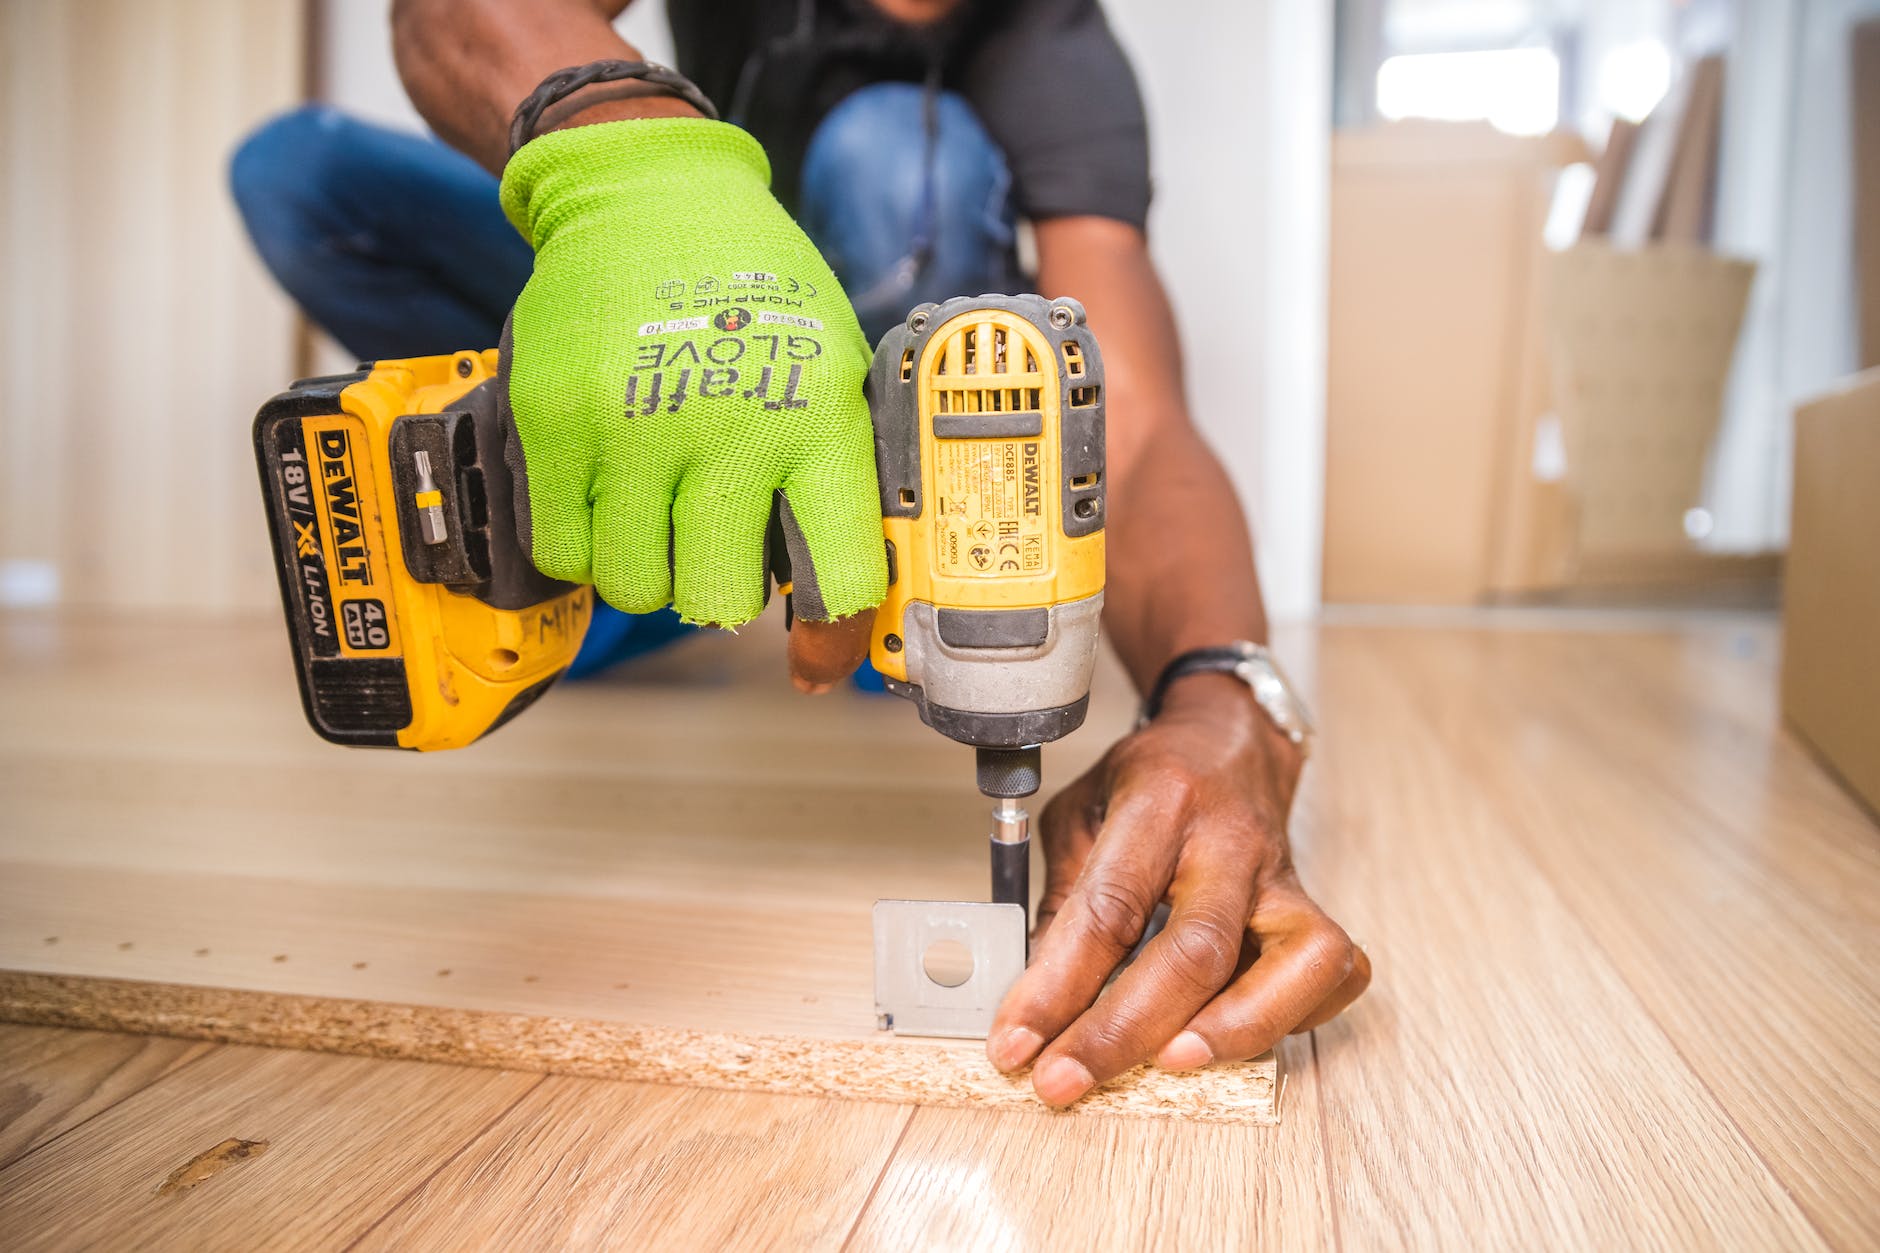 A person is using a cordless drill to attach a bracket to a piece of wood lying on the floor.